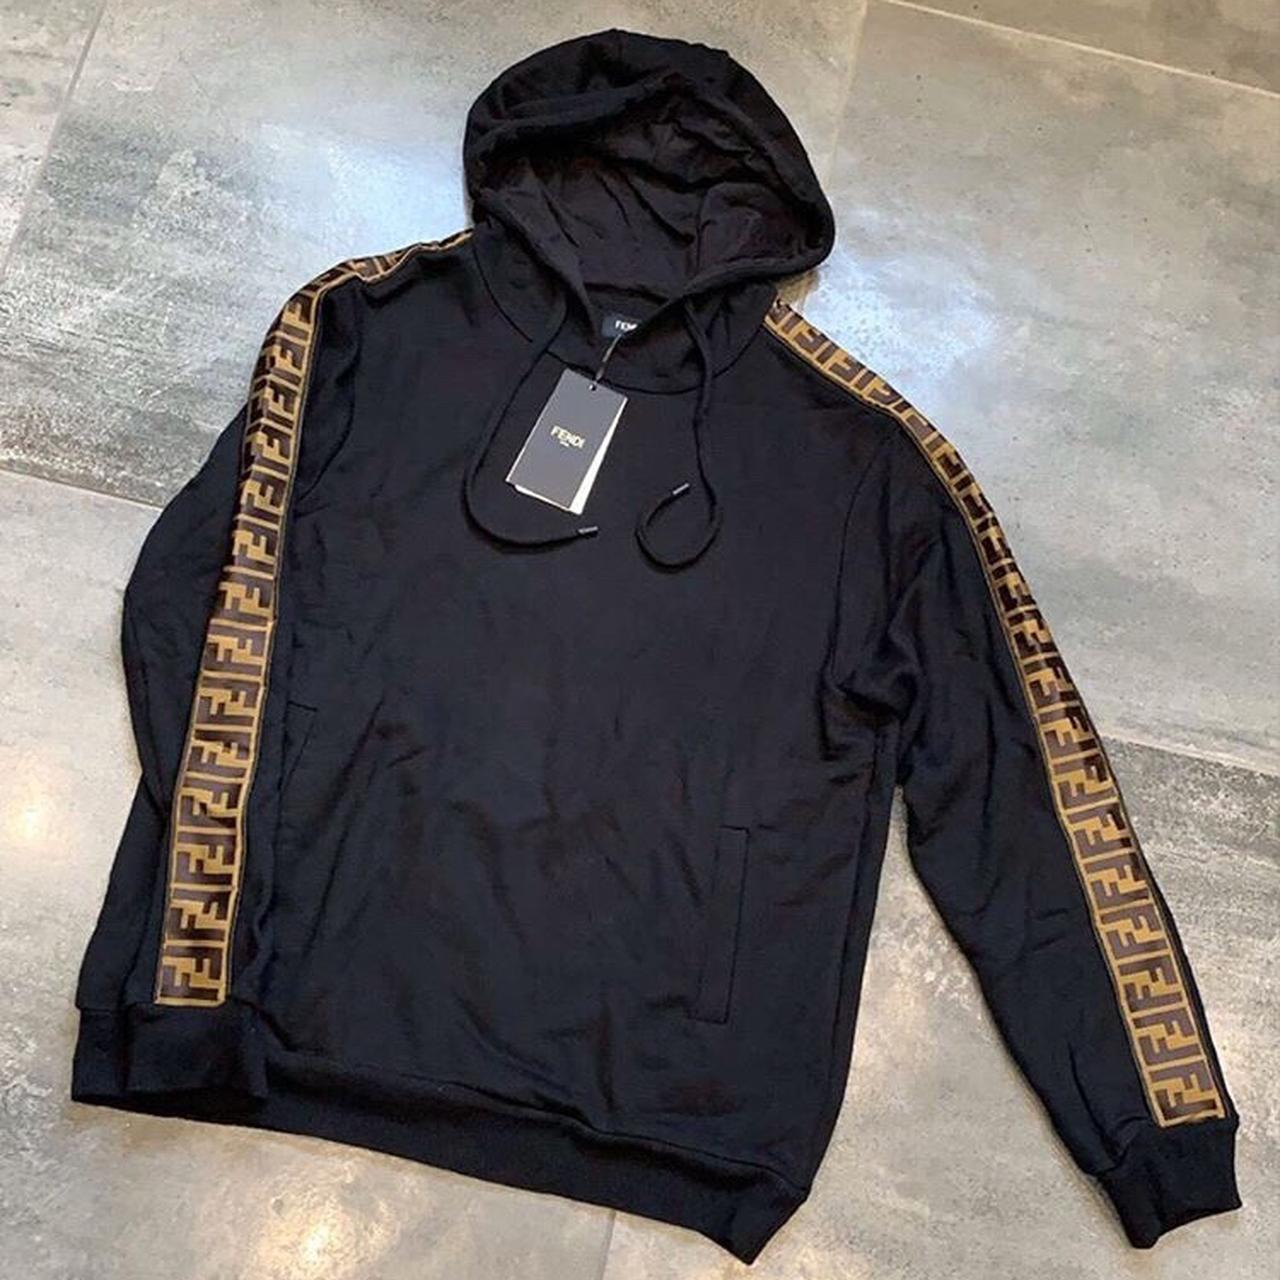 Fendi Tracksuit Size XL In great condition RRP £1500 - Depop